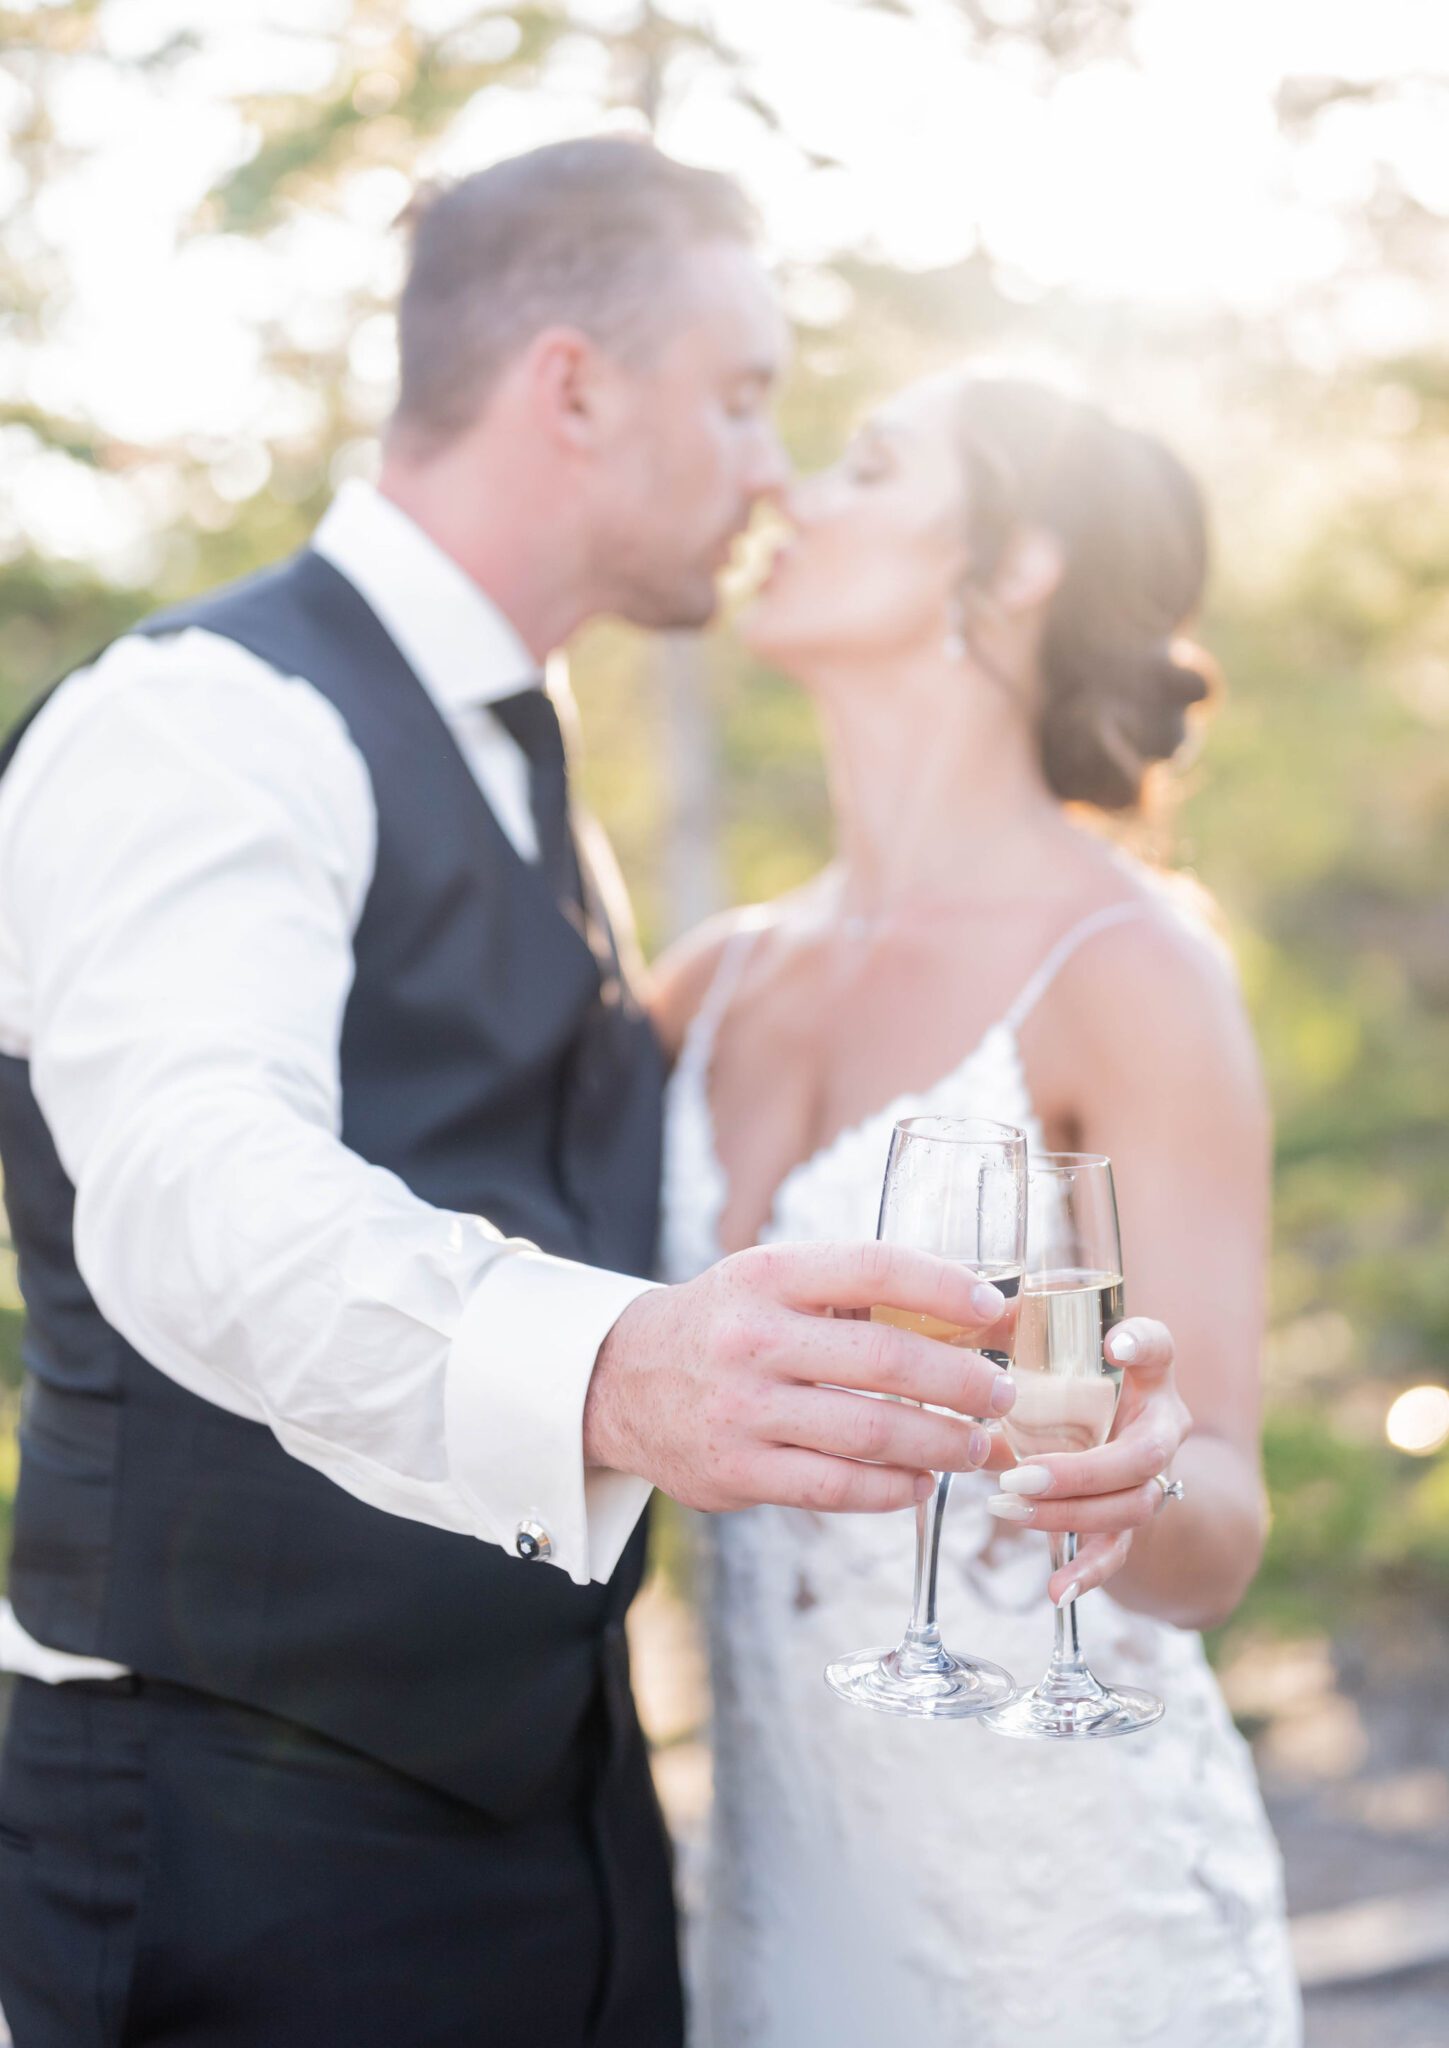 Bride and groom celebrating with champagne at their Banff Summer Wedding.